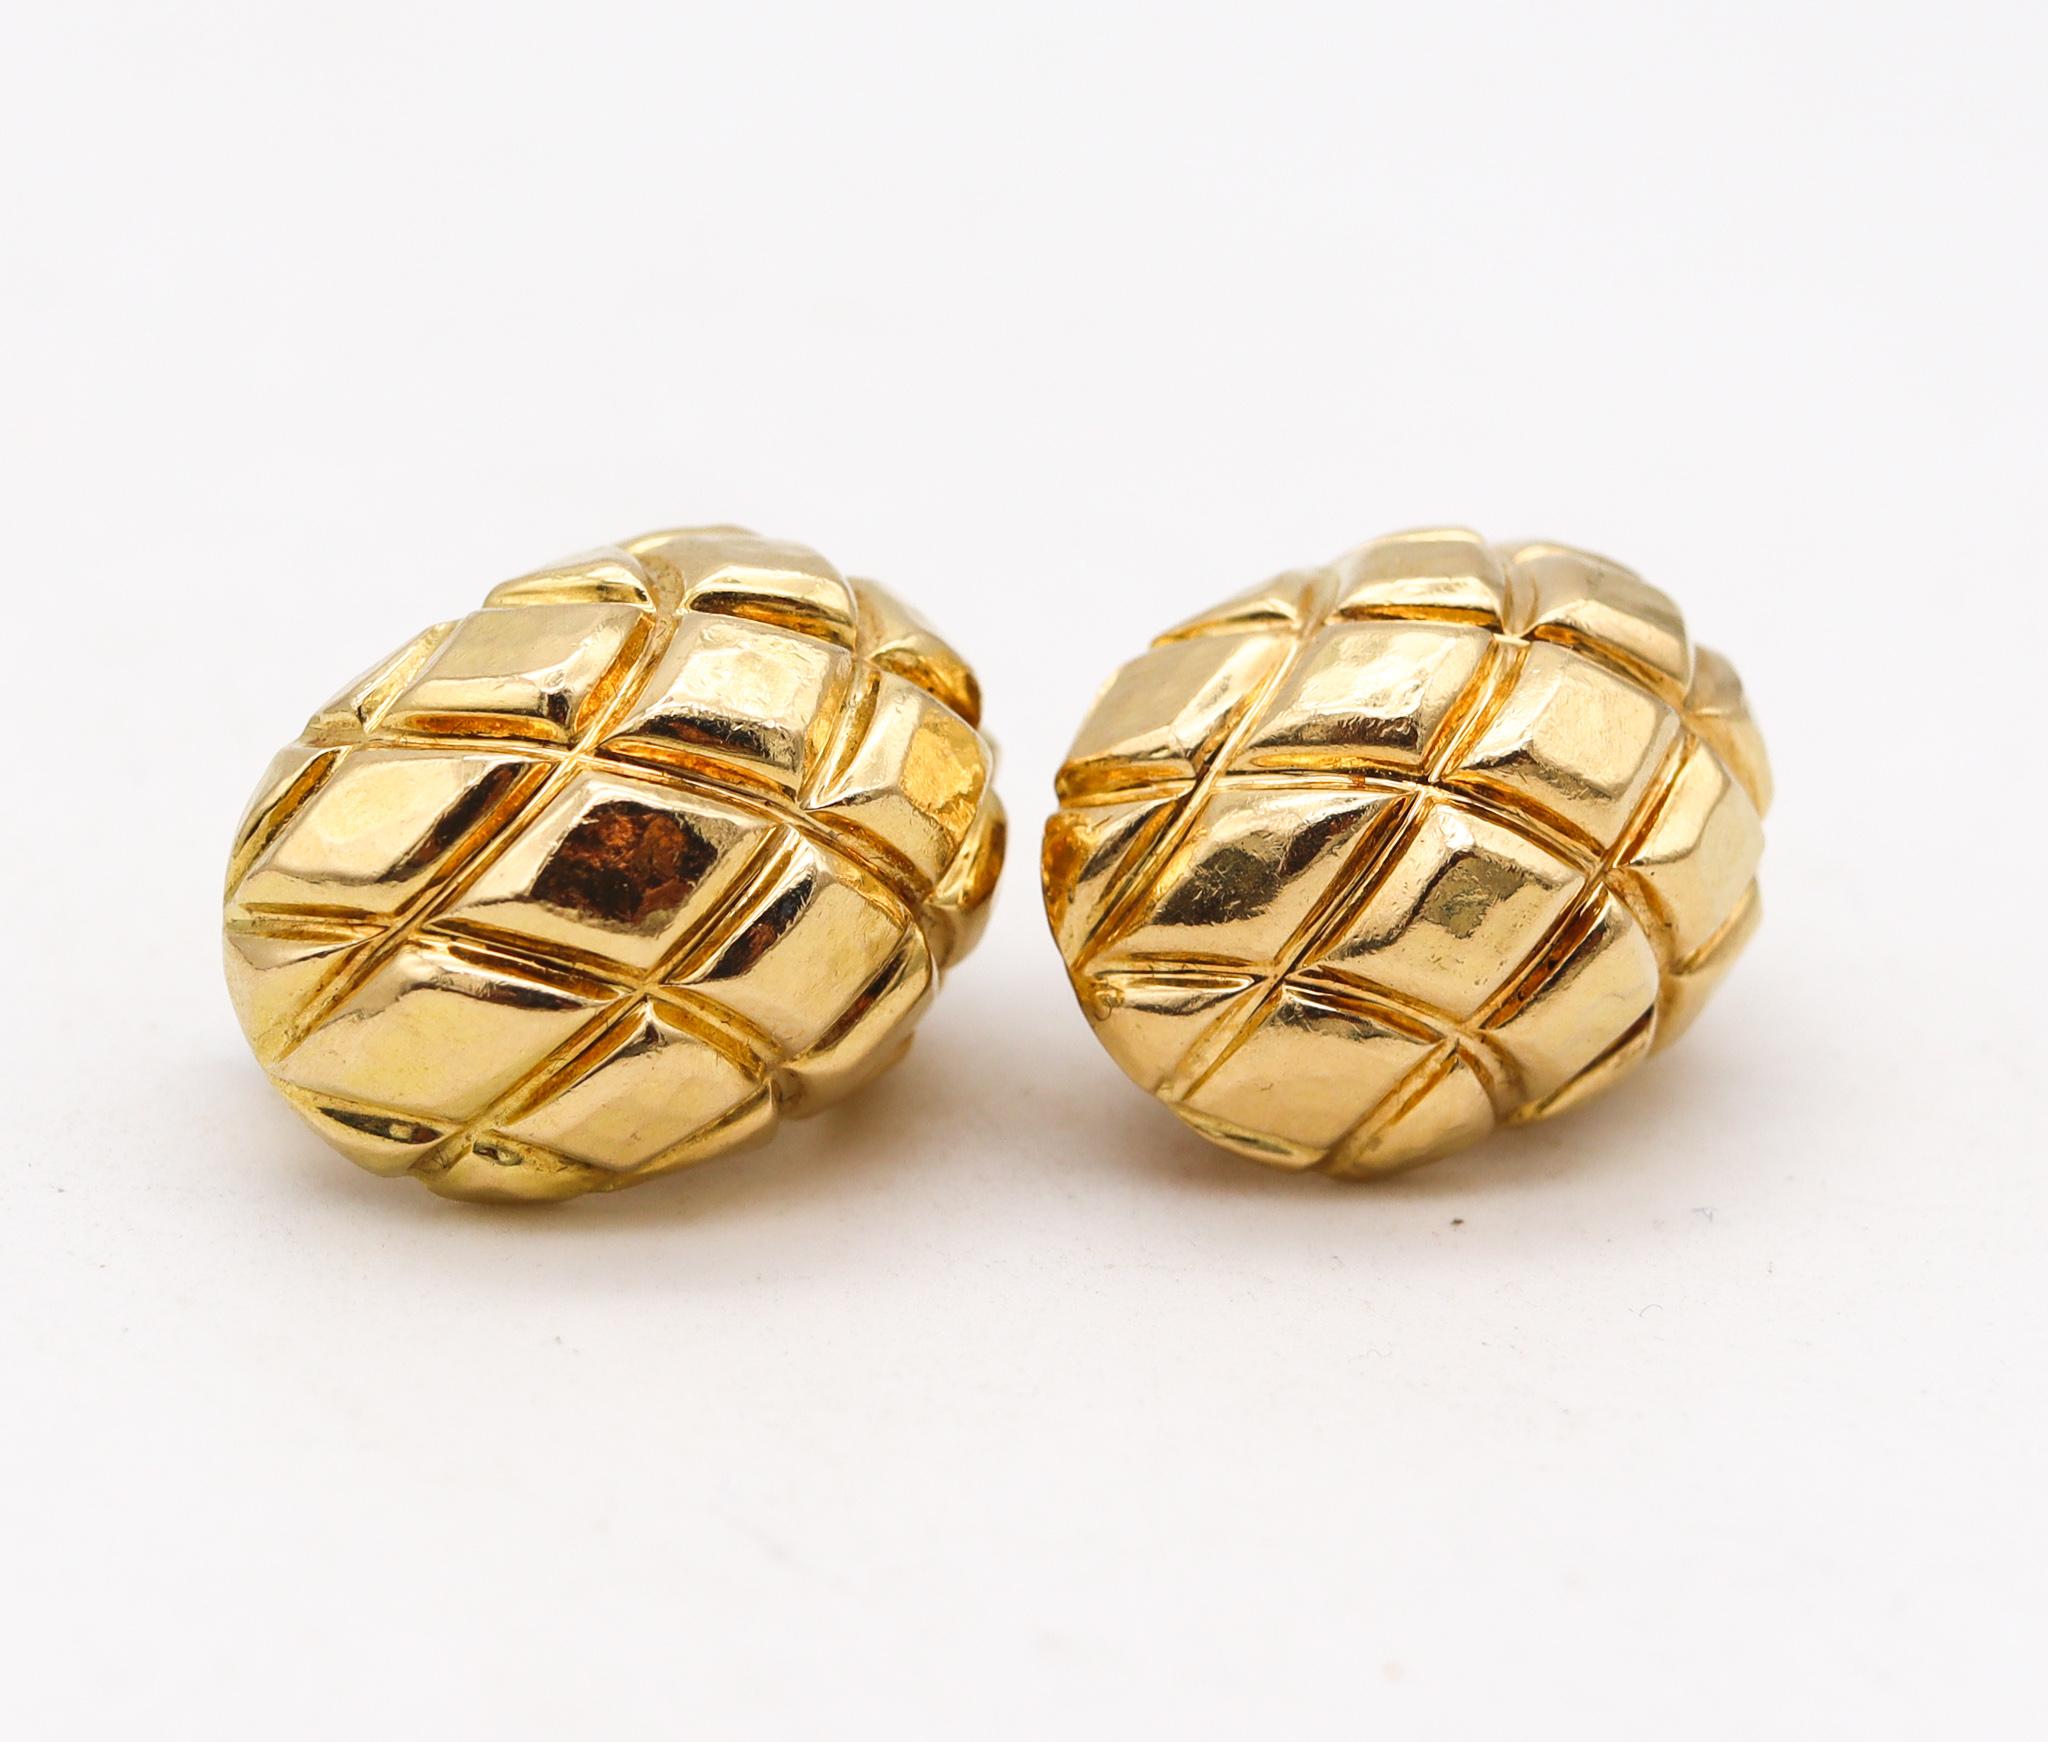 Pair of clips earrings designed by David Webb (1925-1975).

A vintage bombe quilted pair, made in New York city at the atelier of David Webb, back in the 1970's. These pair of clip-On earrings was crafted in an oval shape with quilted squares in